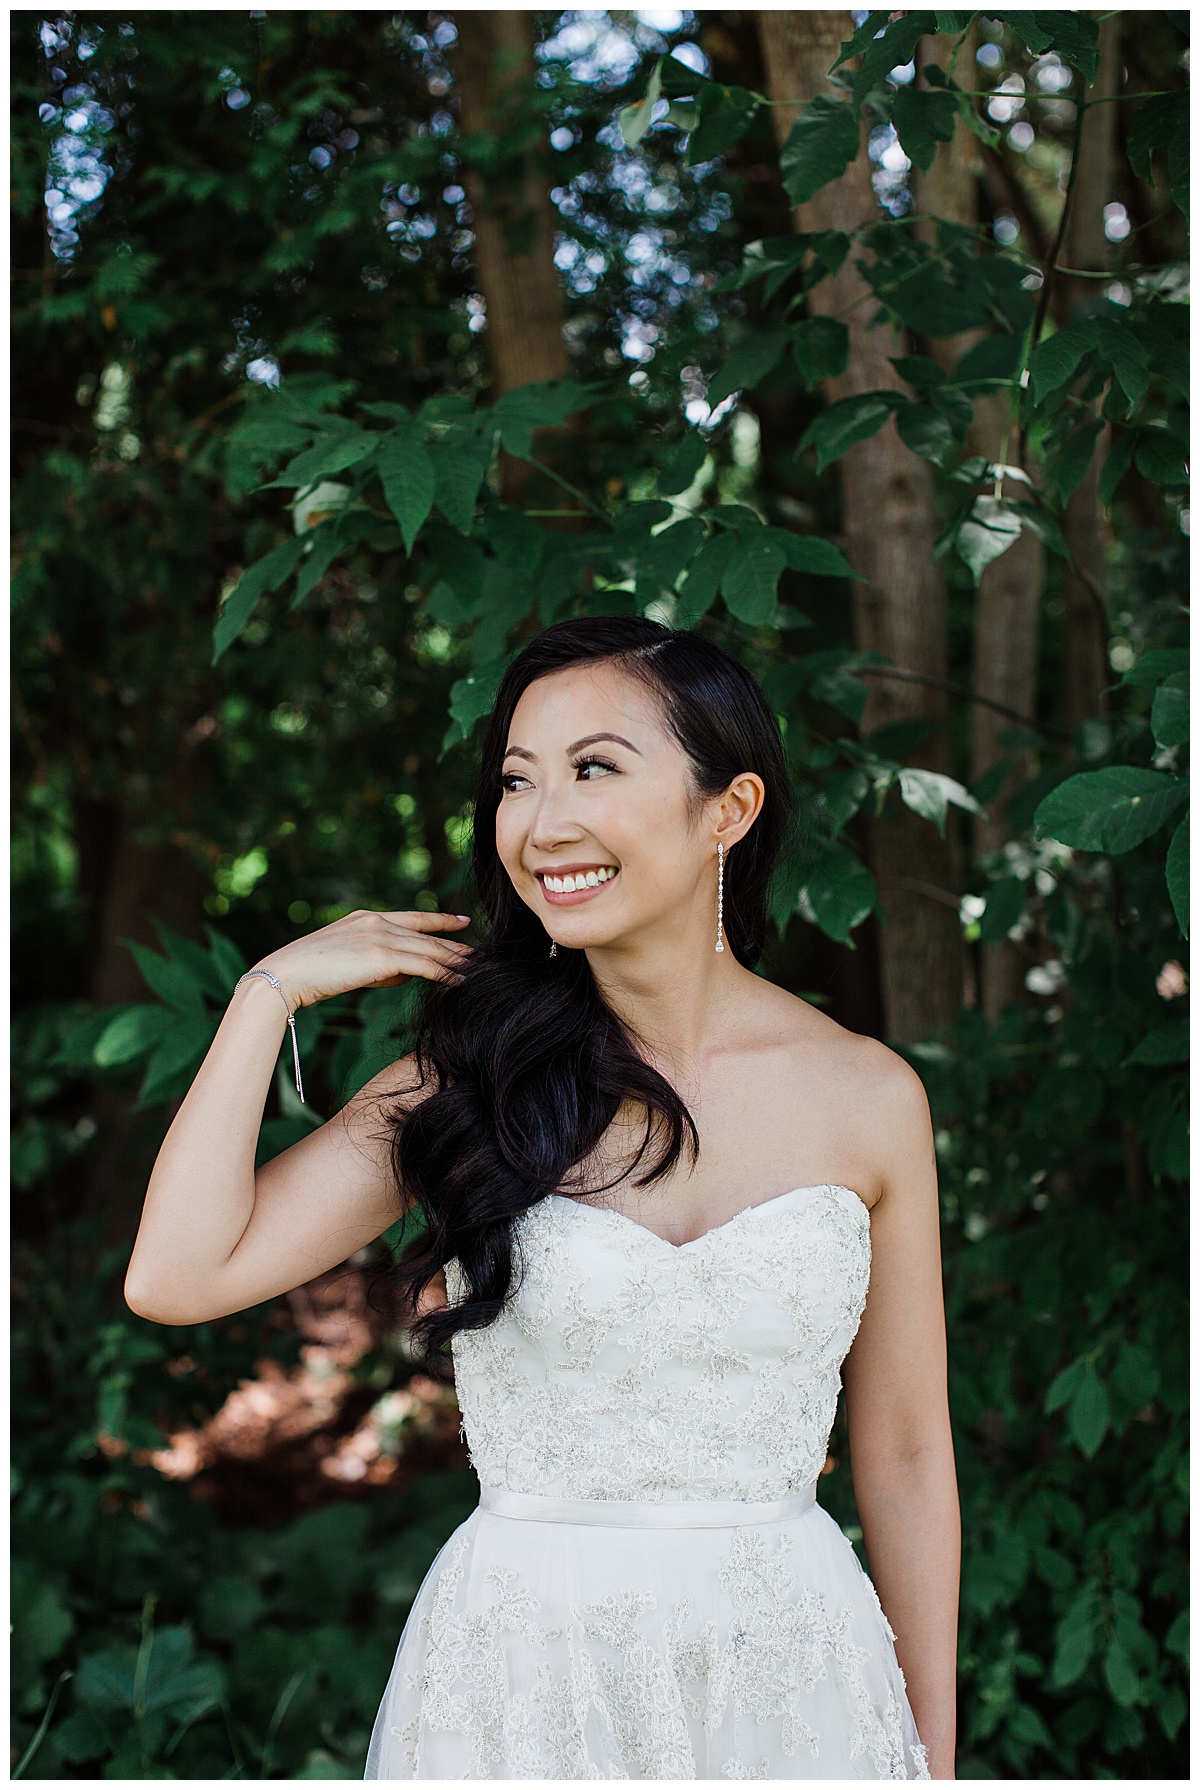 Bride smiling and looking to the side while sweeping hair over her shoulder| outdoor bridal portrait| Bride under tree| asian bride| sweetheart neckline gown| Toronto photographer| 3photography